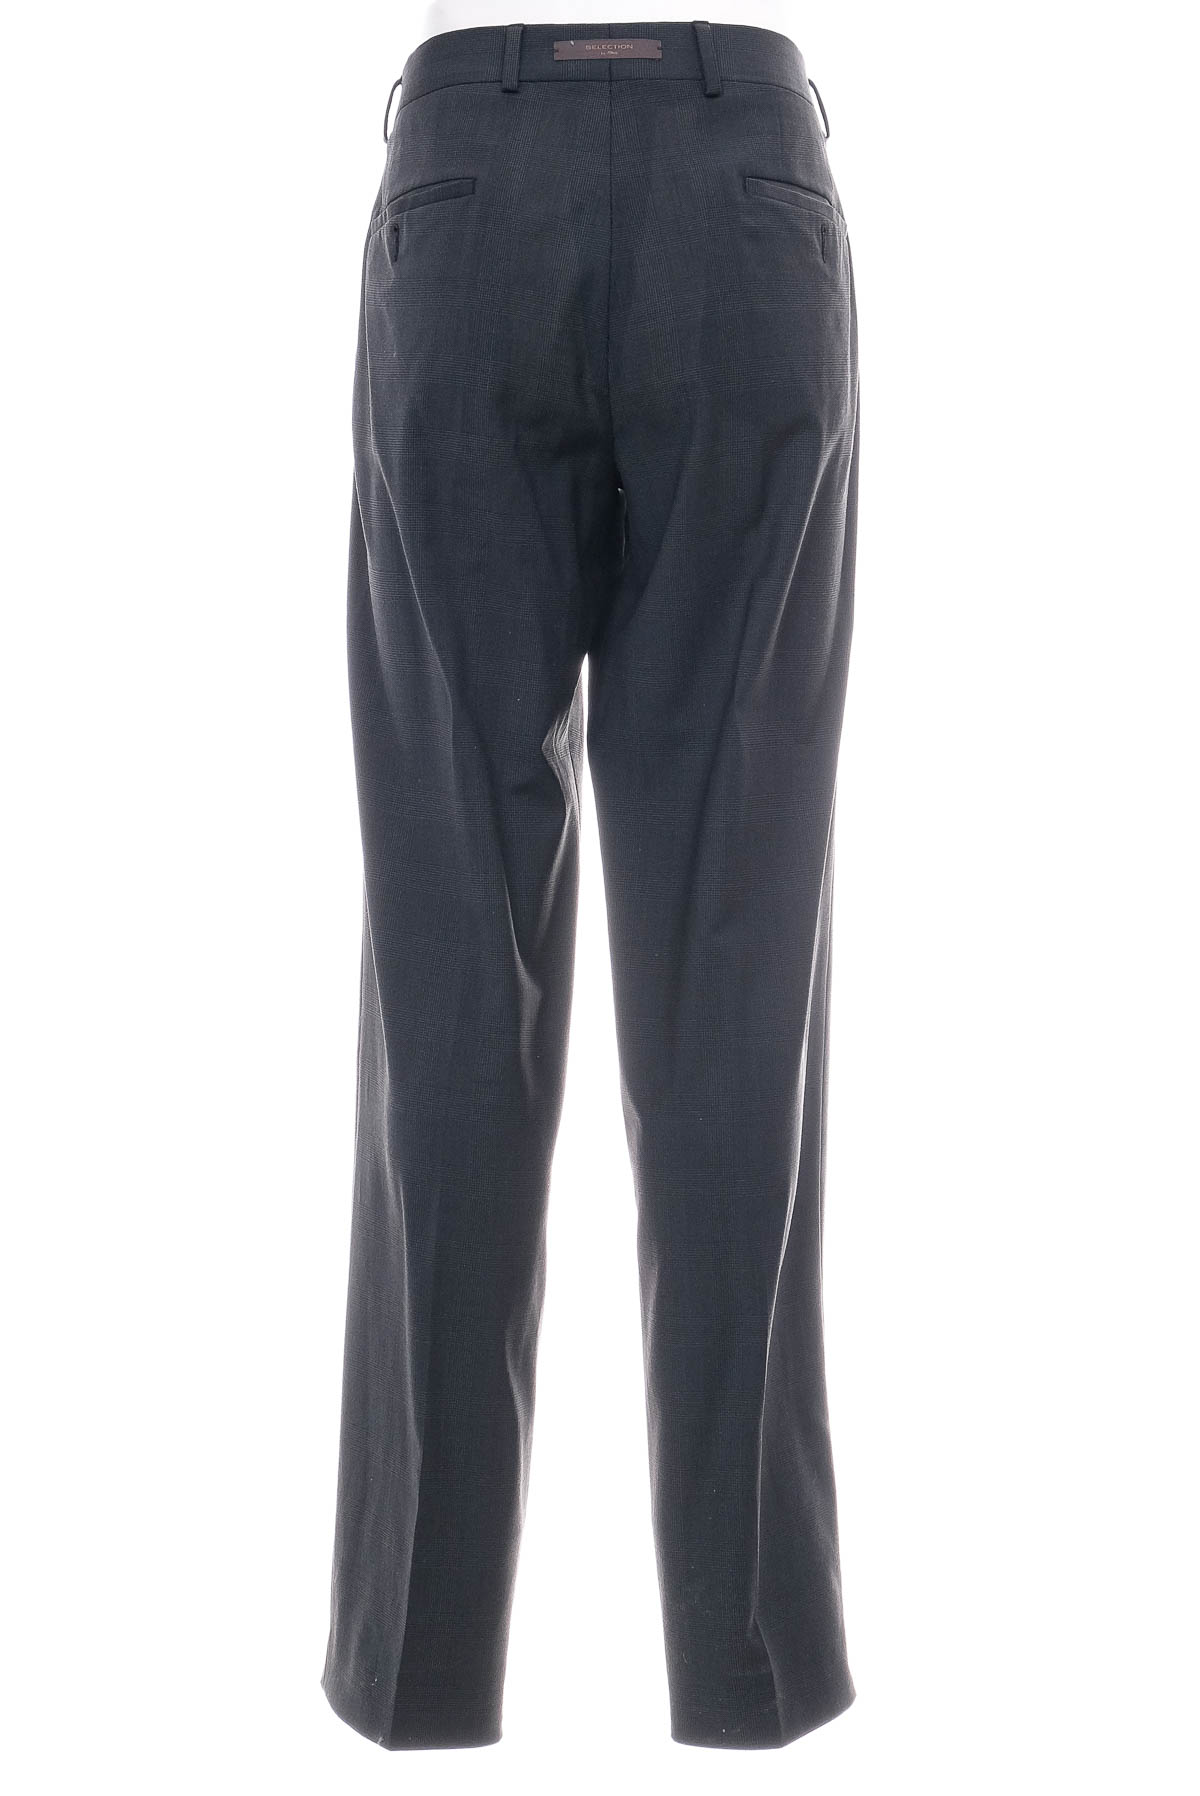 Men's trousers - SELECTION by S.Oliver - 1